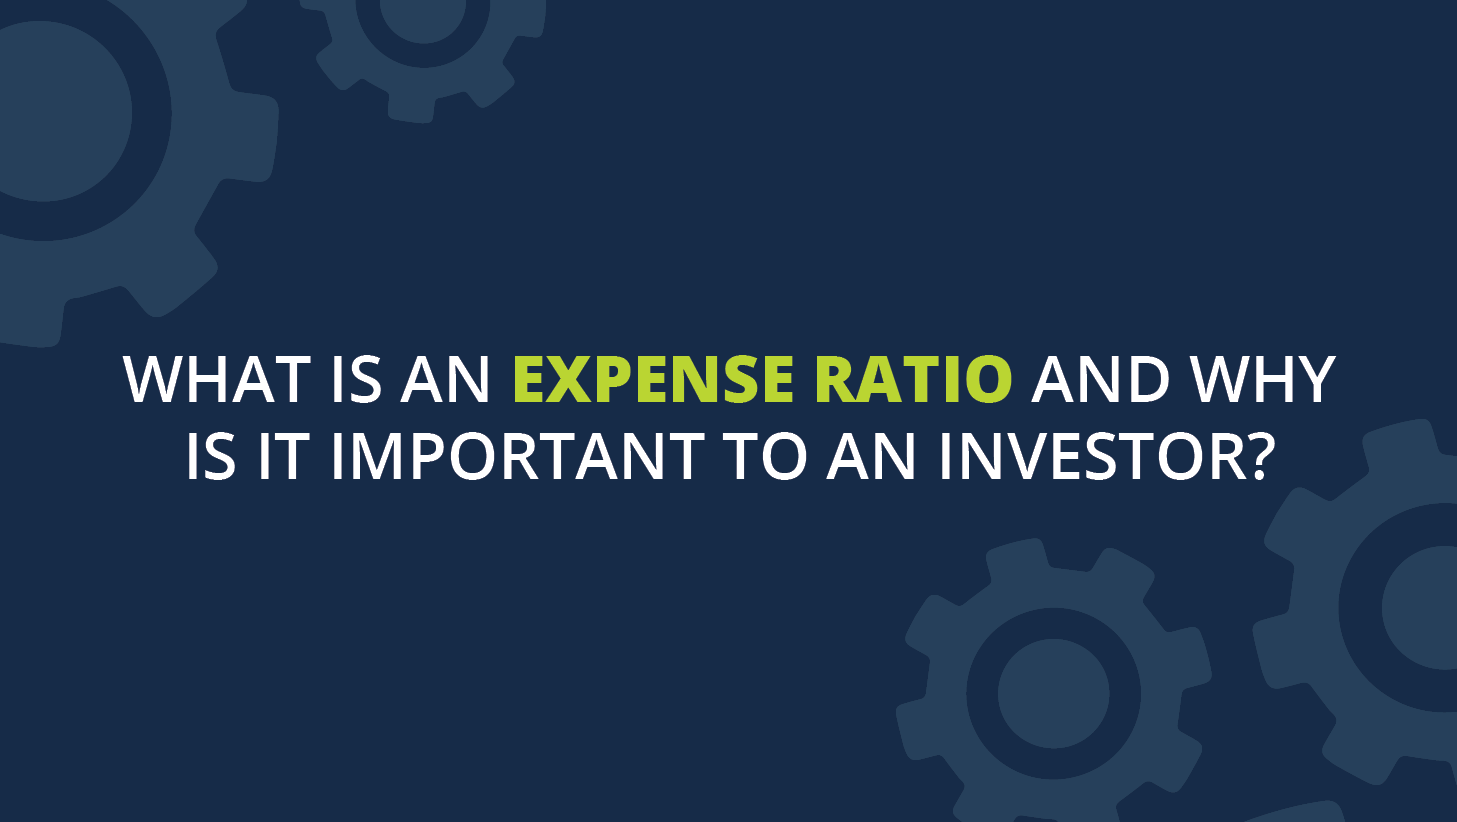 What is an Expense Ratio and Why is it Important to an Investor?